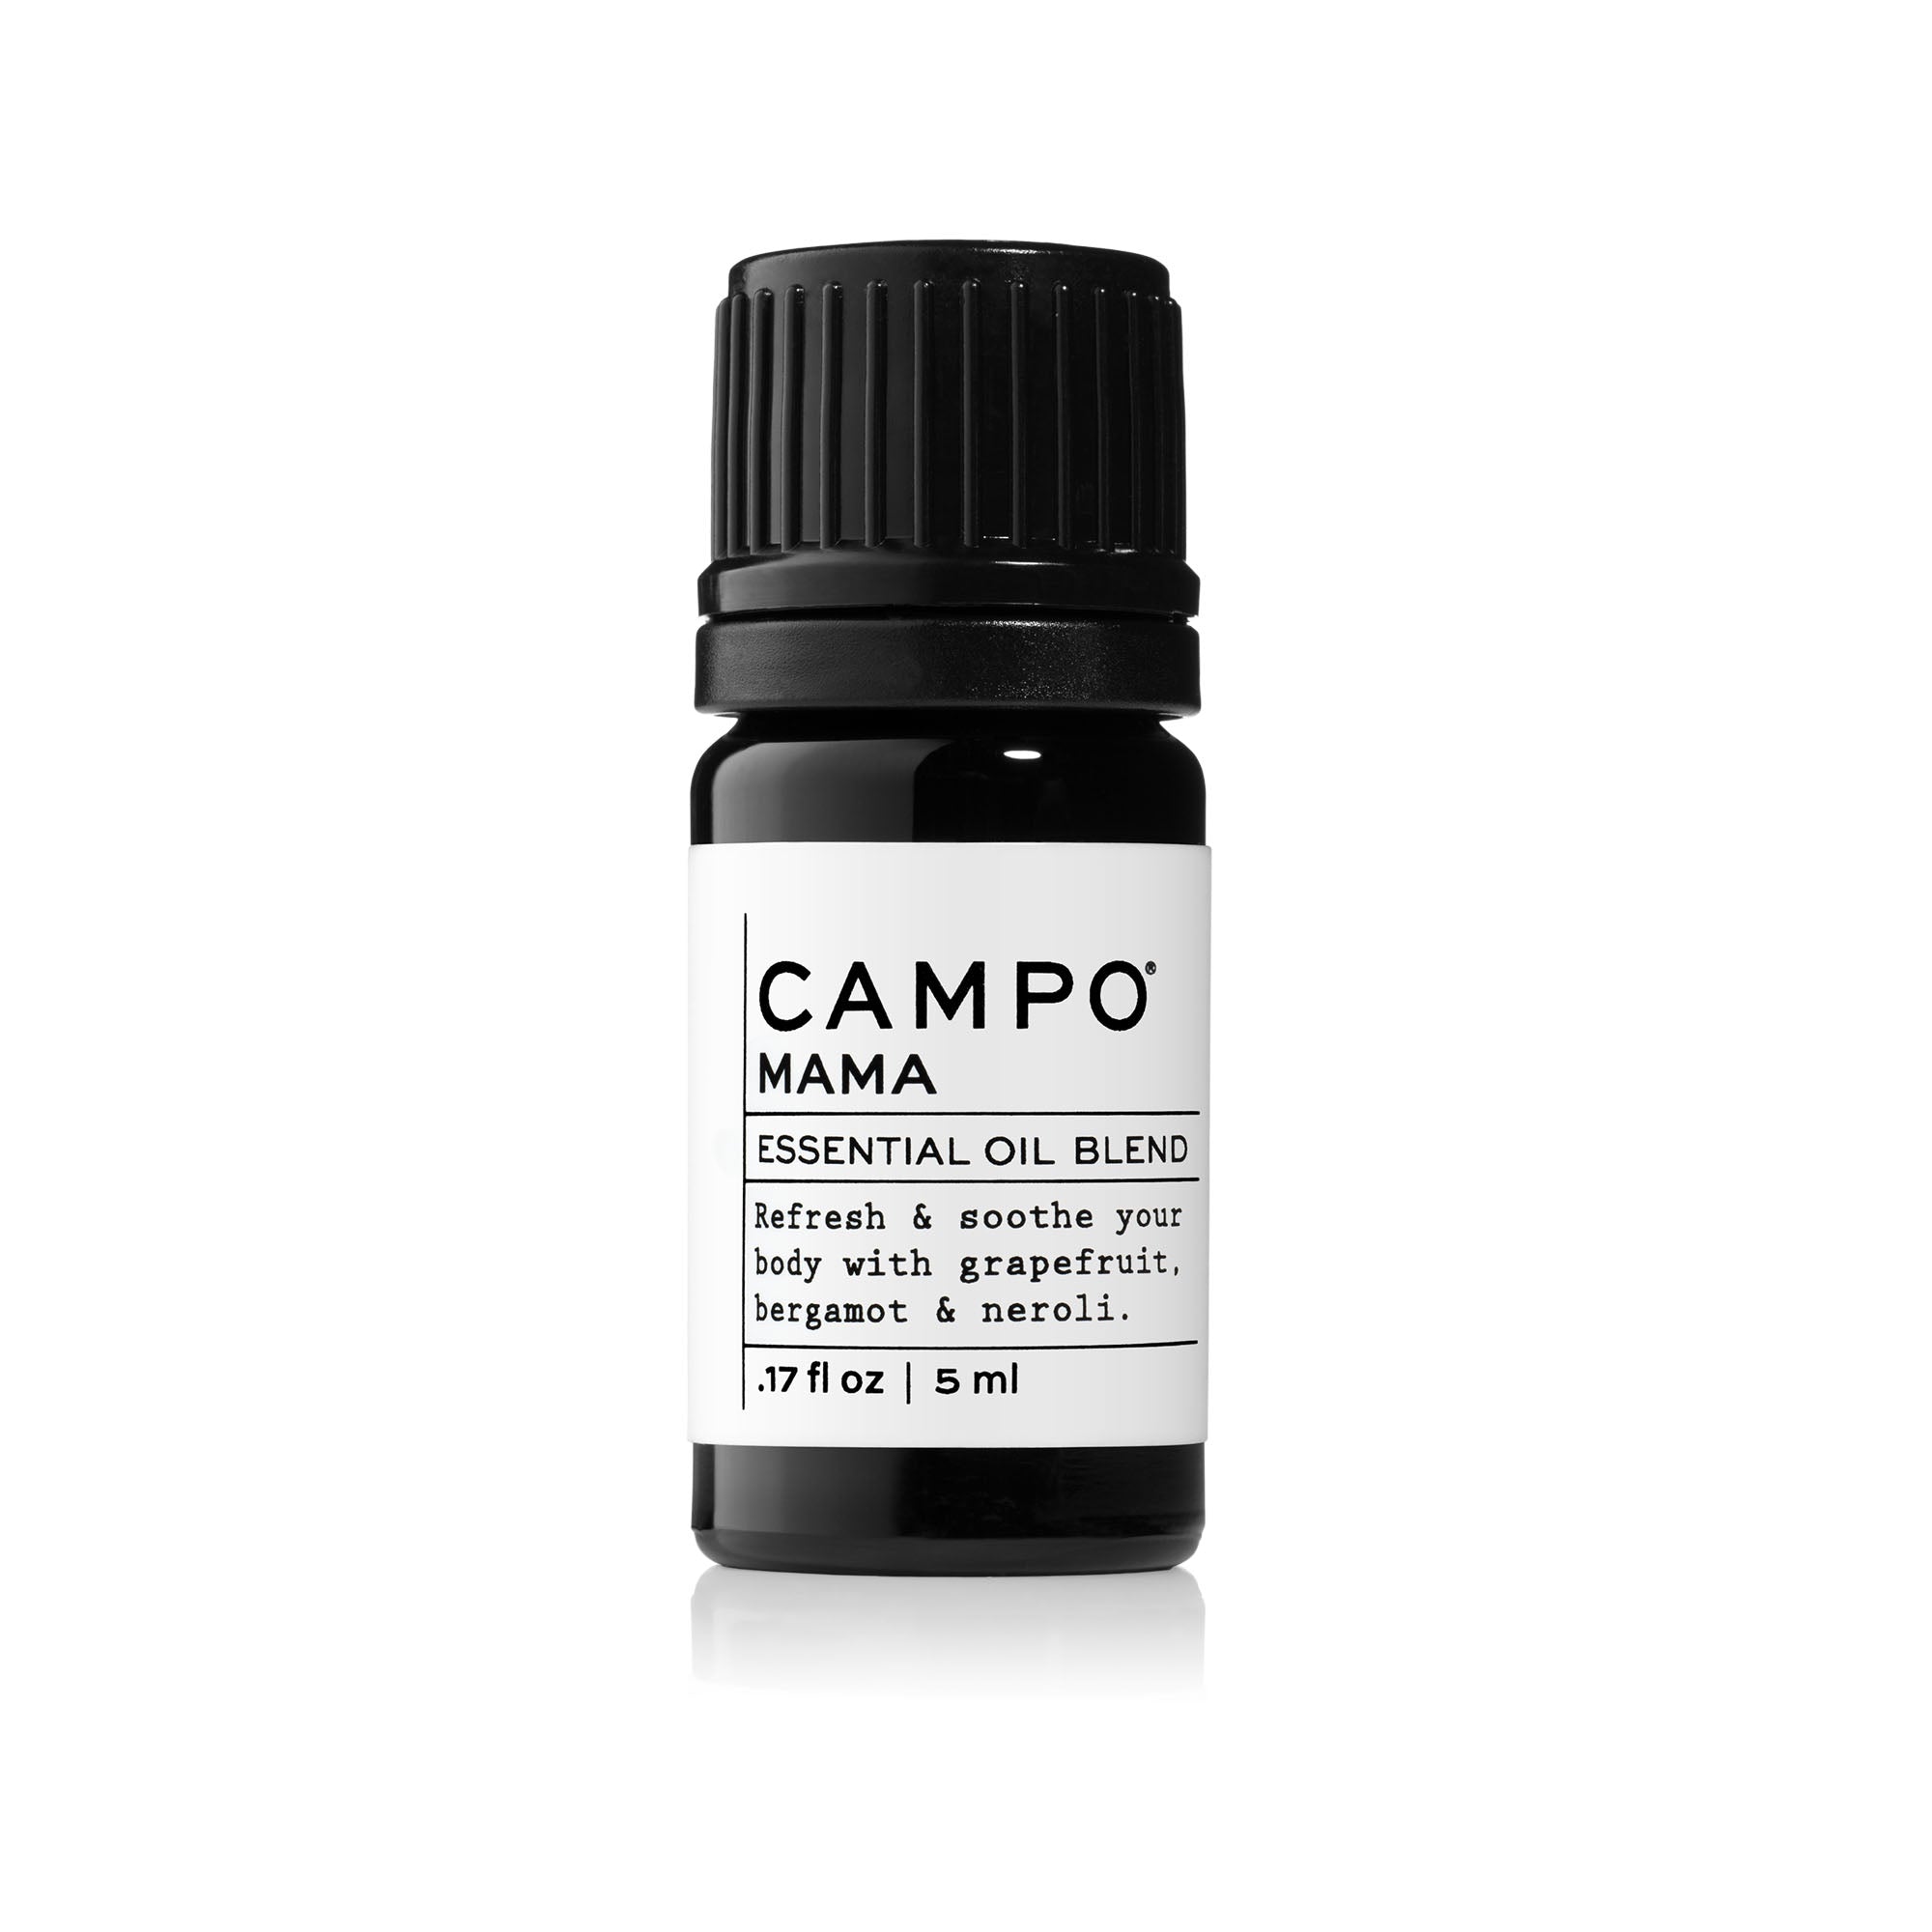 Campo Beauty MAMA Blend 15 ml Essential Oil. Pamper yourself, refresh & uplift your mood with these 100% pure essential oils of grapefruit, bergamot & neroli.